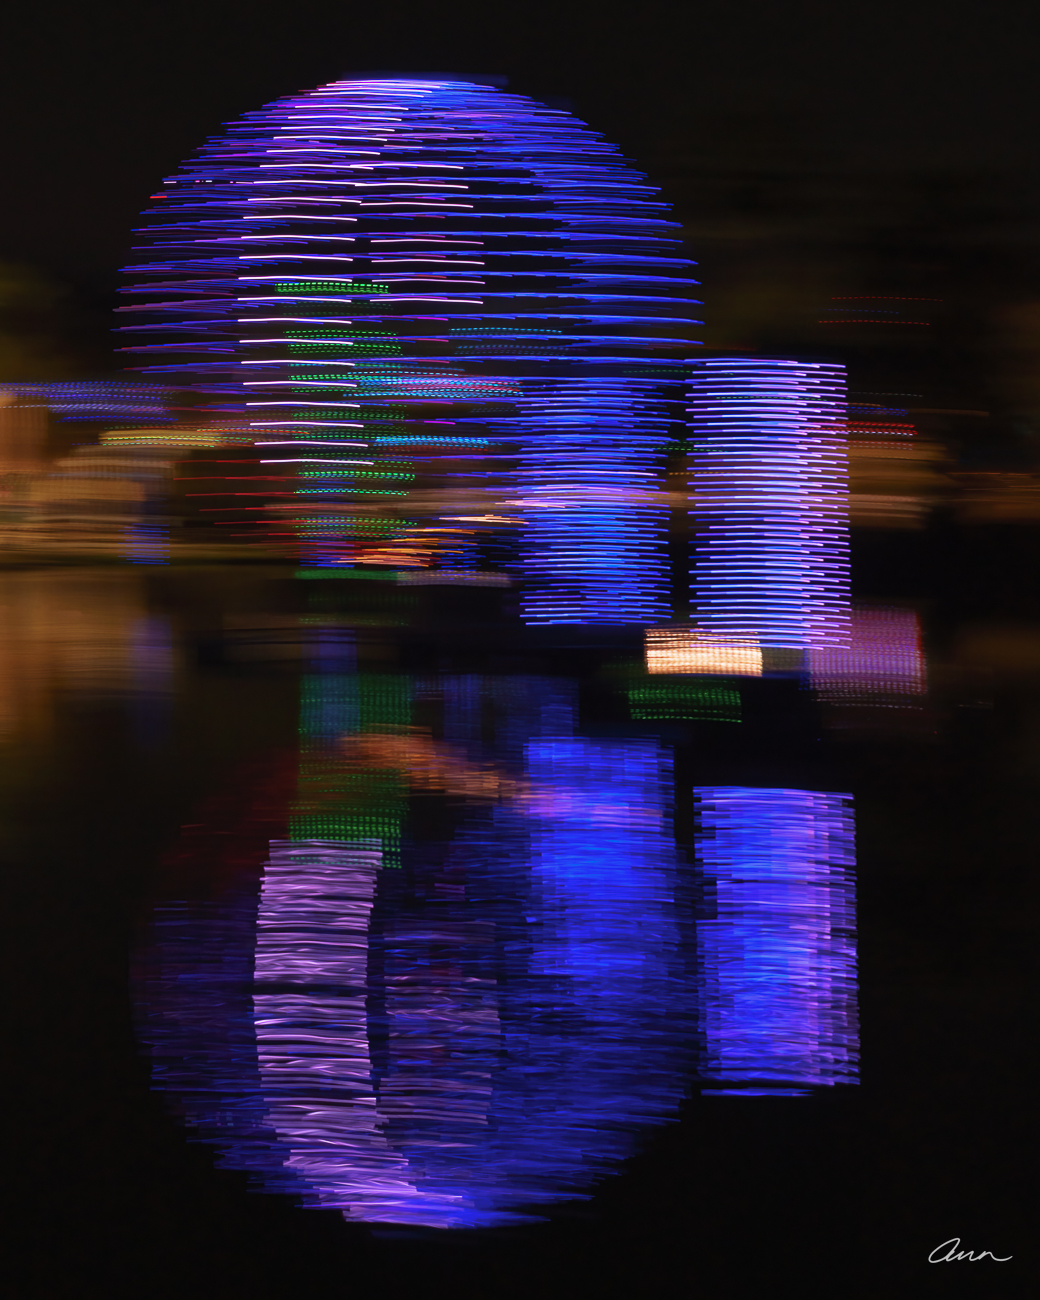 A sphere of neon lights reflects in a pond